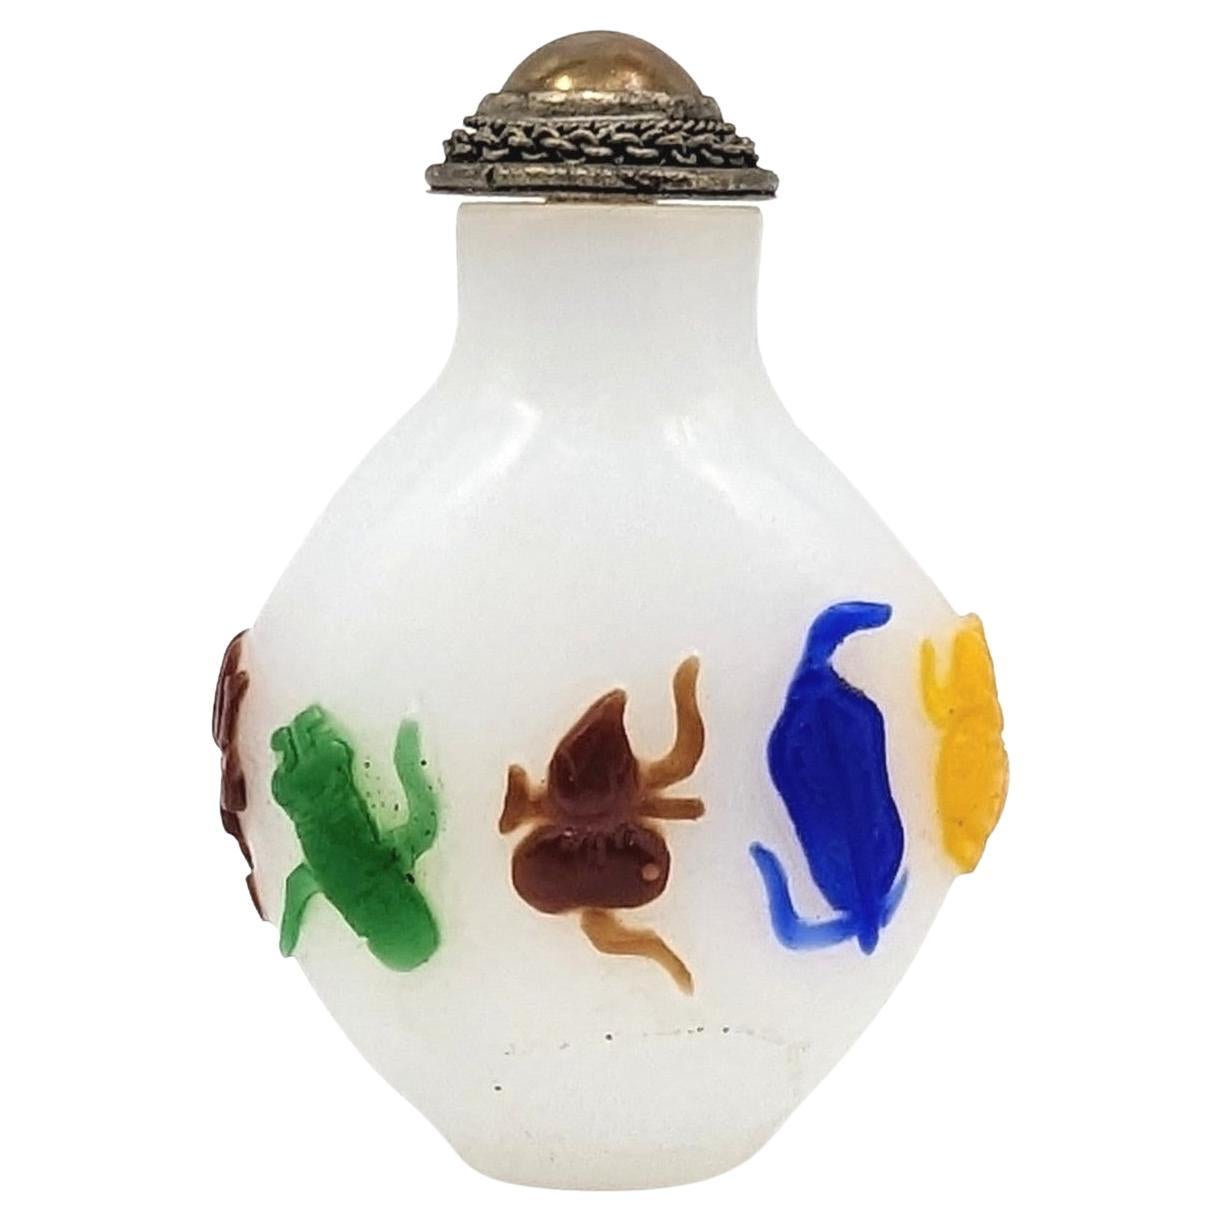 Antique Chinese multi-color (5) glass overlay snuff bottle with eight treasures finely carved in low relief in 4 colors on pale white ground

19th Century, Qing Dynasty